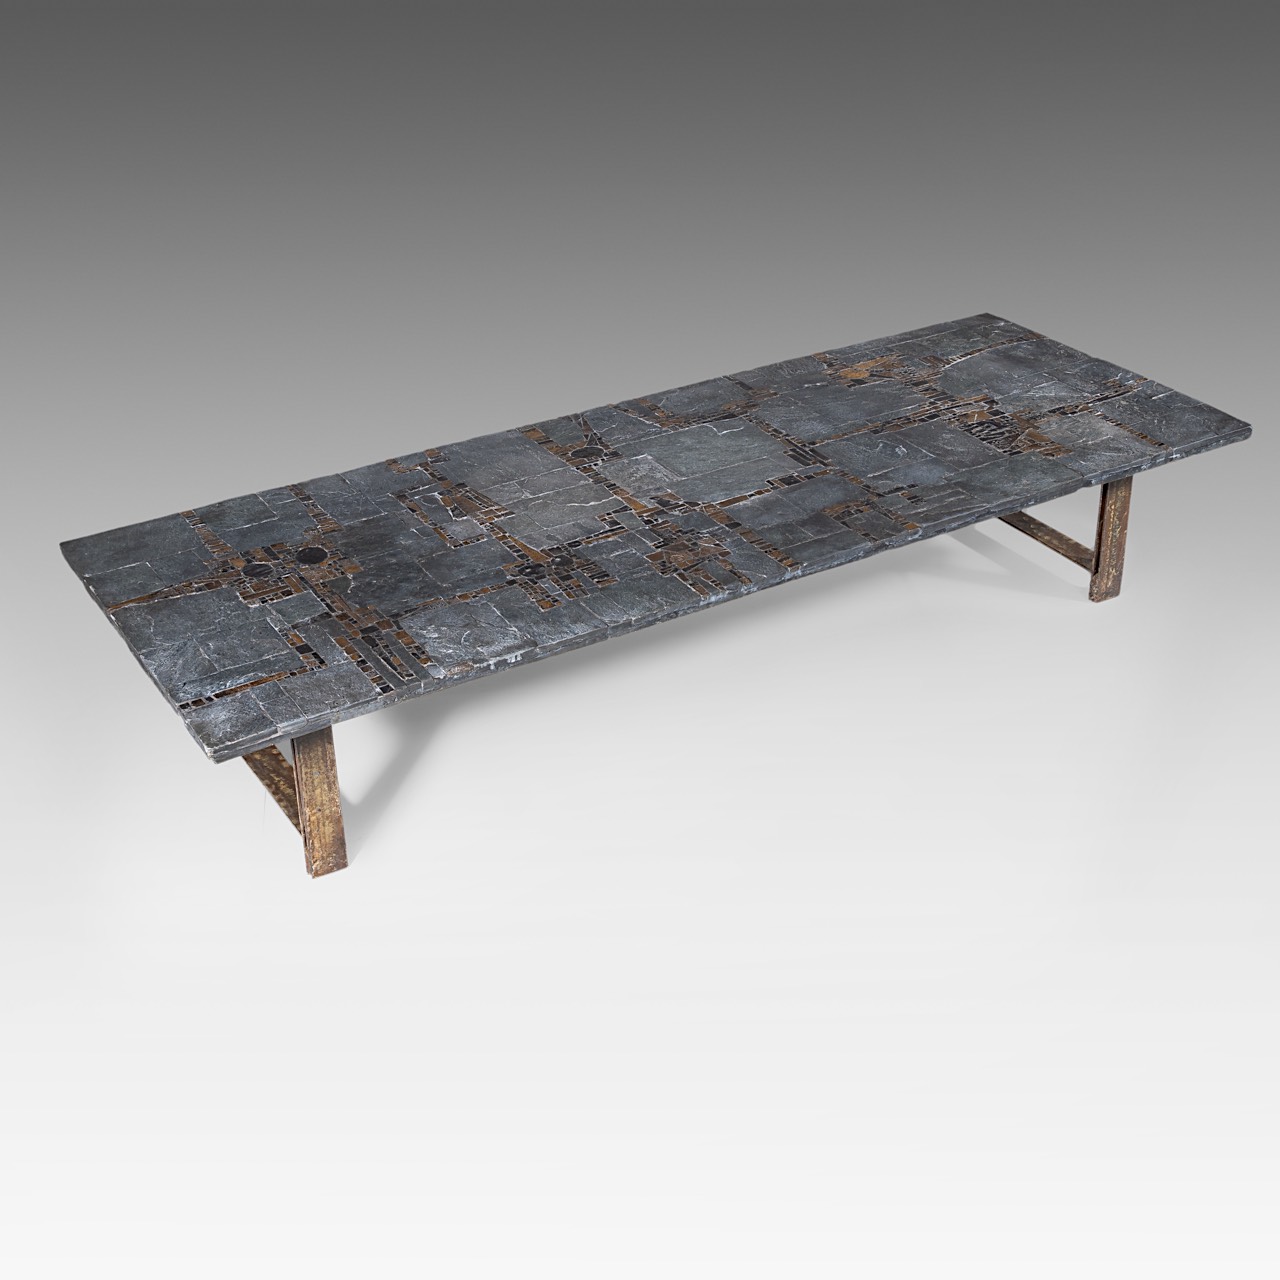 A vintage '60s Pia Manu coffee table, slate stone and gilt-glazed ceramic table top on a steel frame - Image 12 of 16